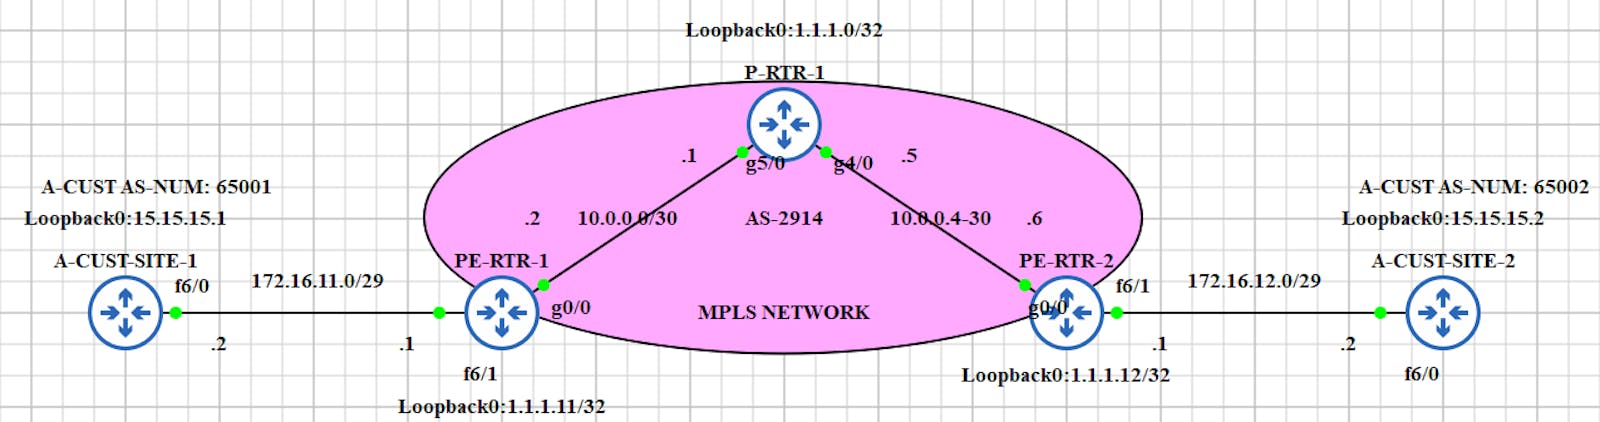 Configuring MPLS L3 VPN on Cisco using GNS3